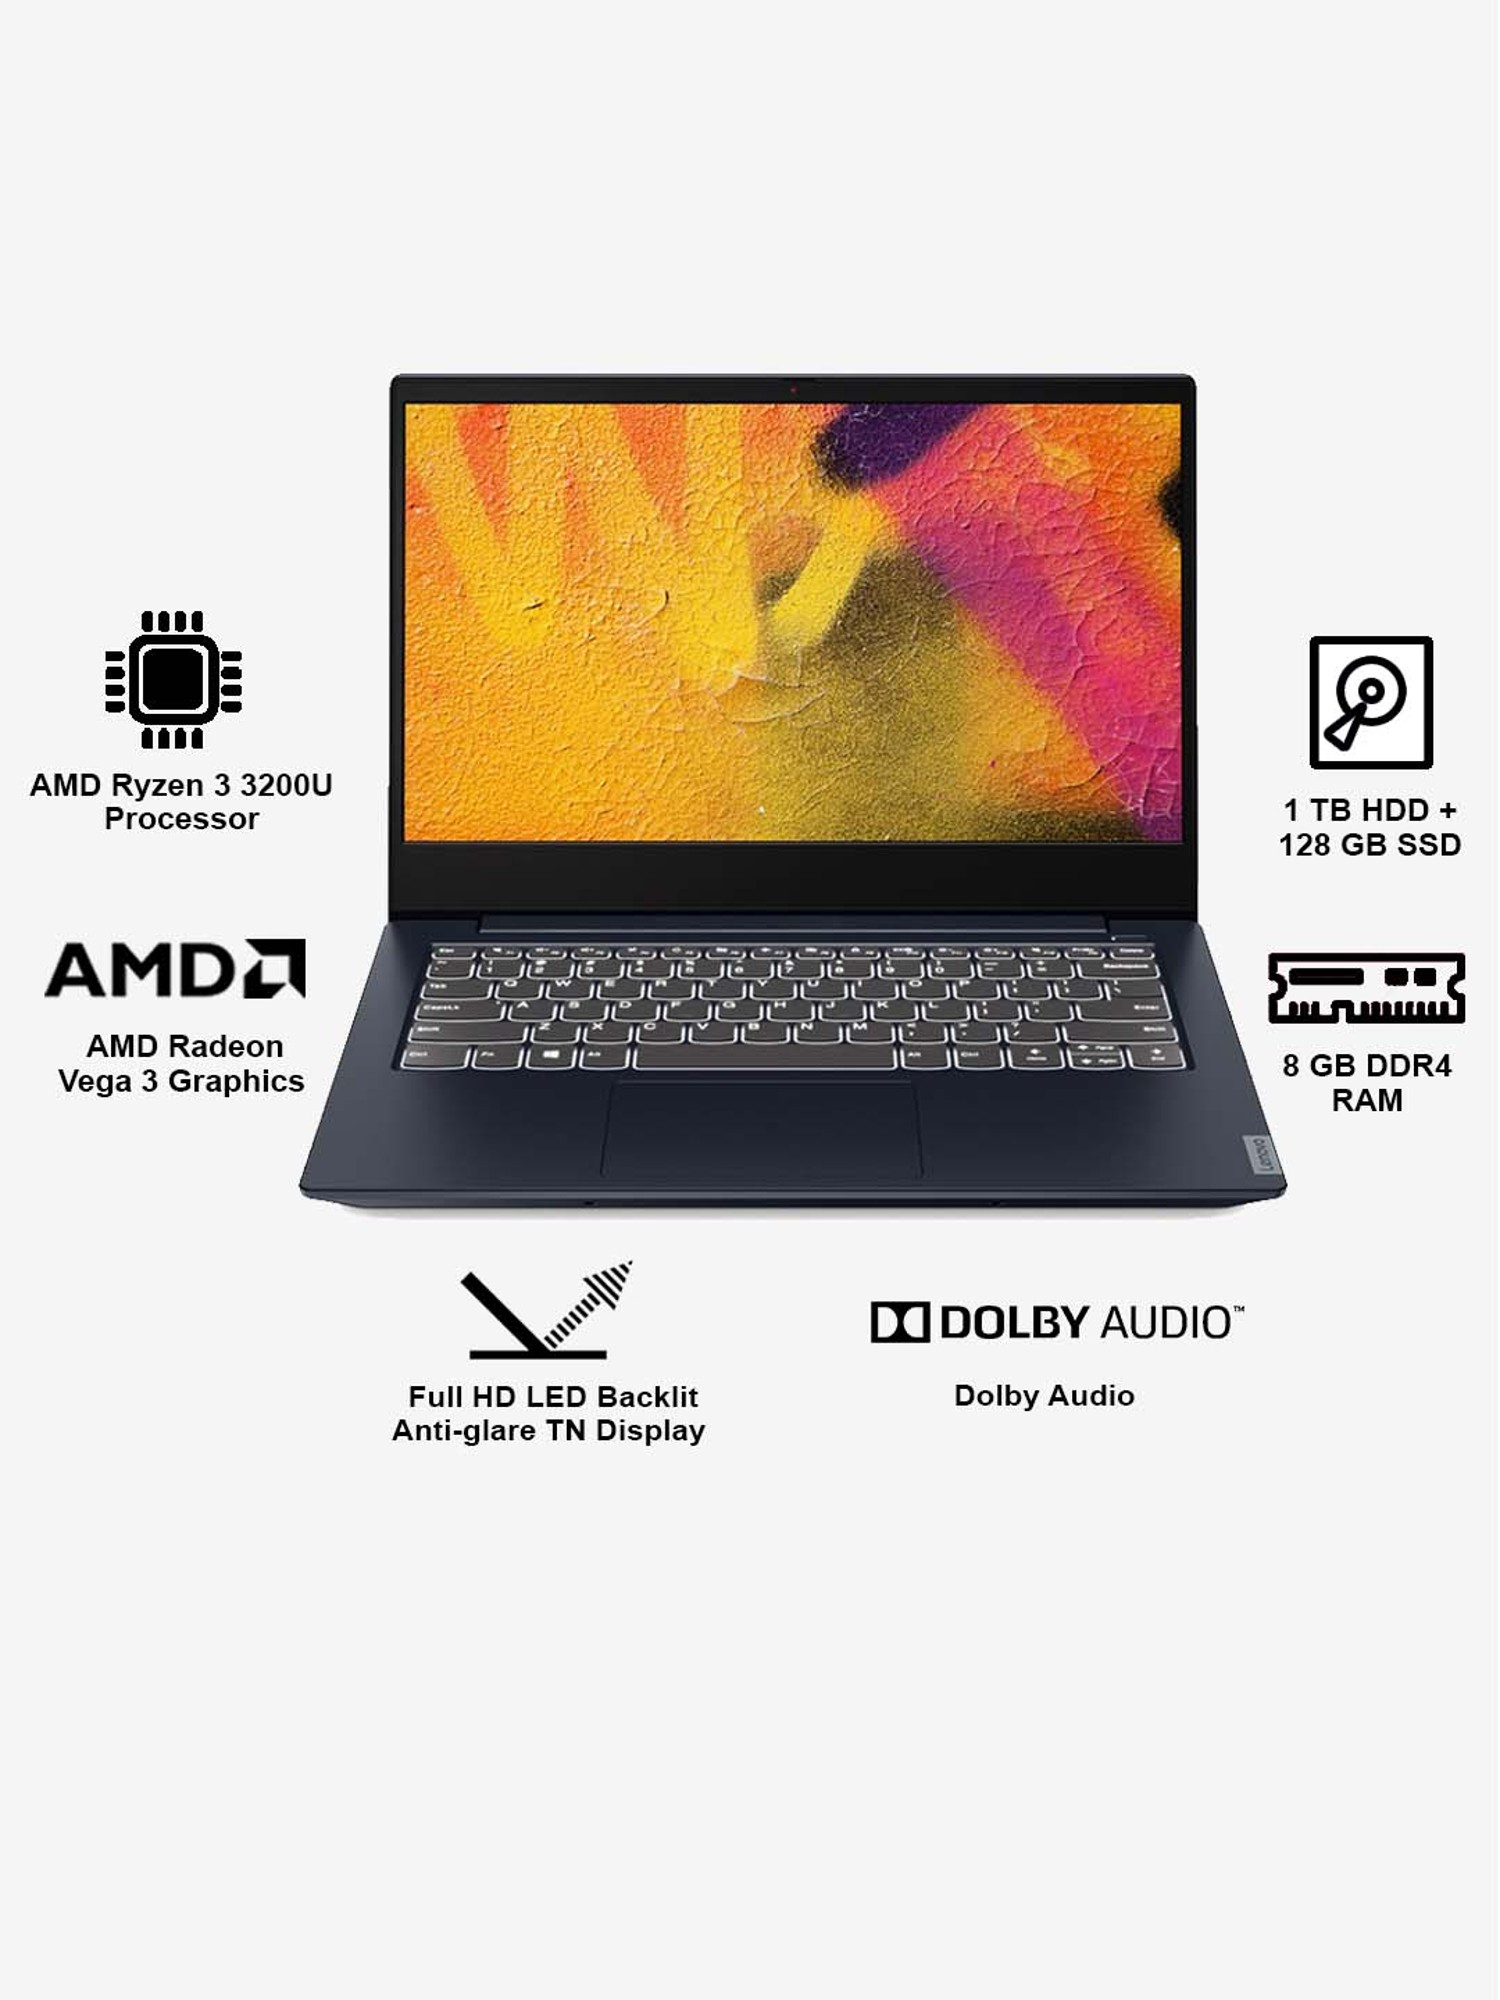 Lenovo Ideapad S340 Laptop 81nb005vin Amd Ryzen 3 8gb 1tb Hdd 128gb Ssd 14 Inch Win10h Mso Int Blue From Lenovo At Best Prices On Tata Cliq